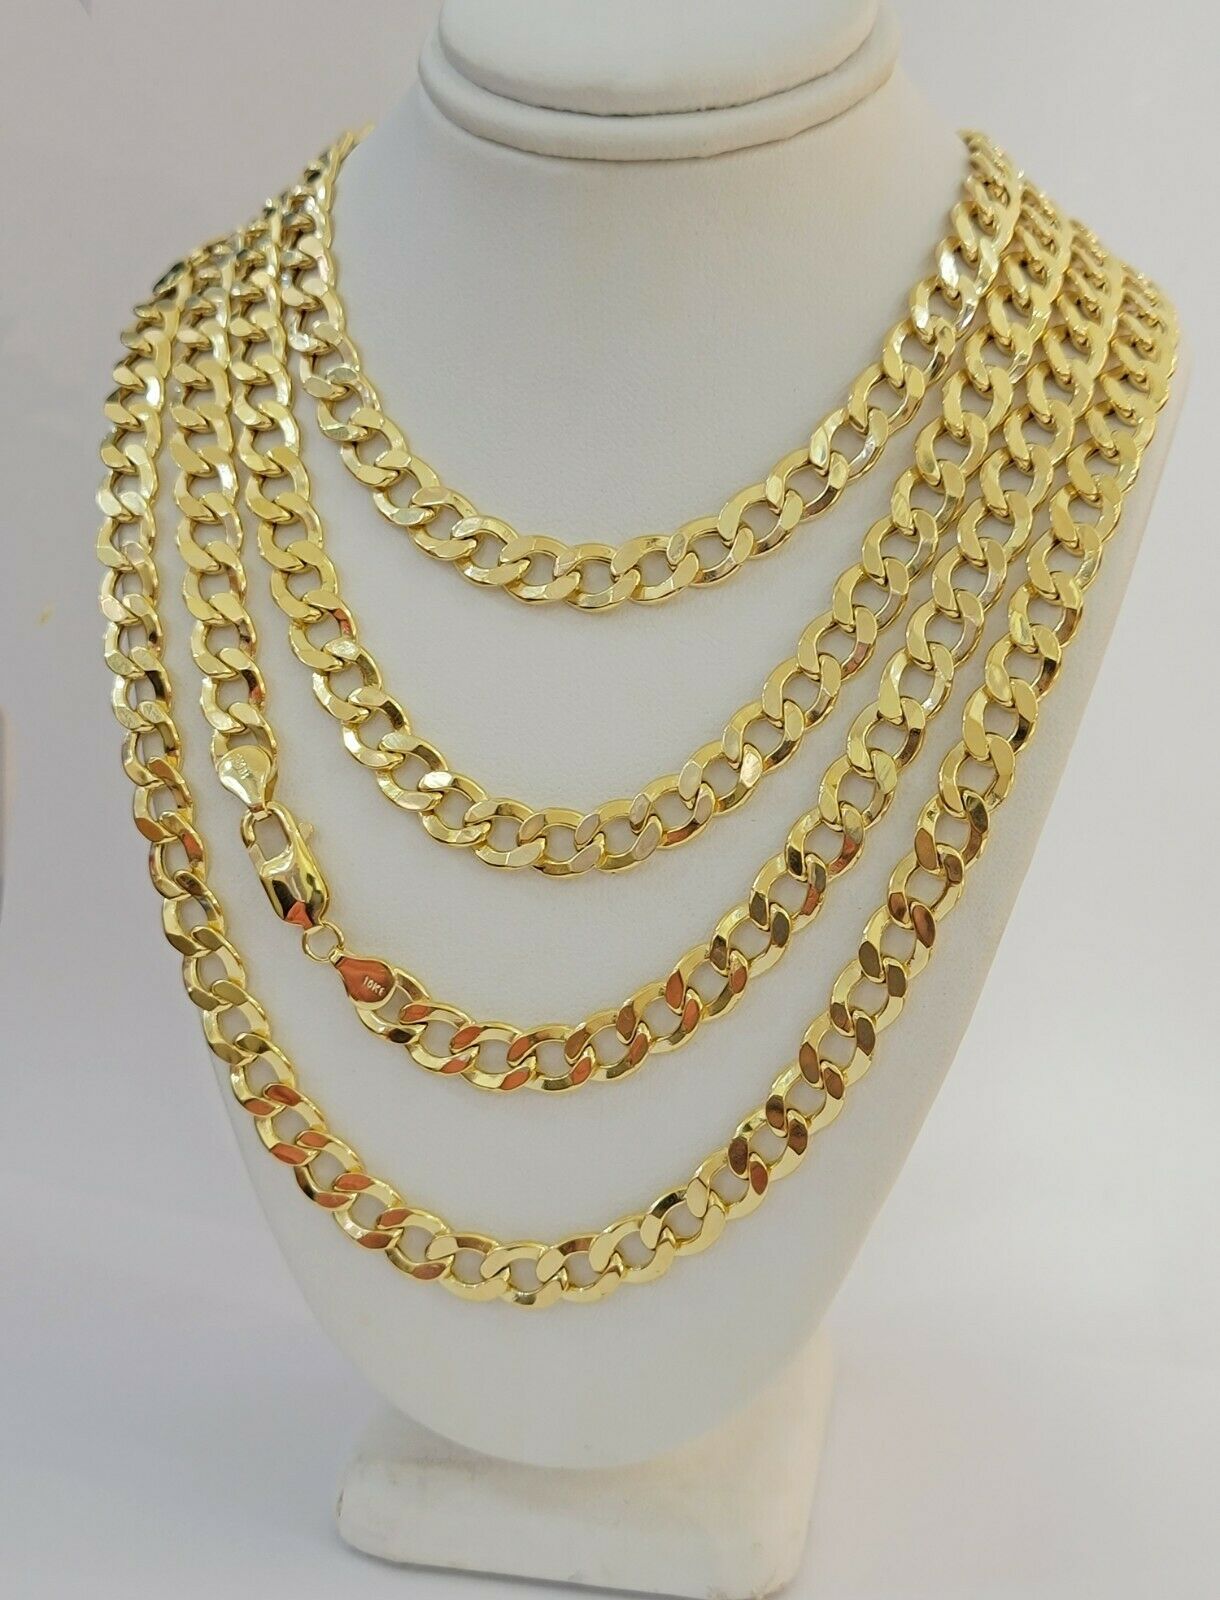 10kt Yellow Gold Chain 8mm Cuban Curb Link Necklace 26"Inch Strong Link REAL 10k